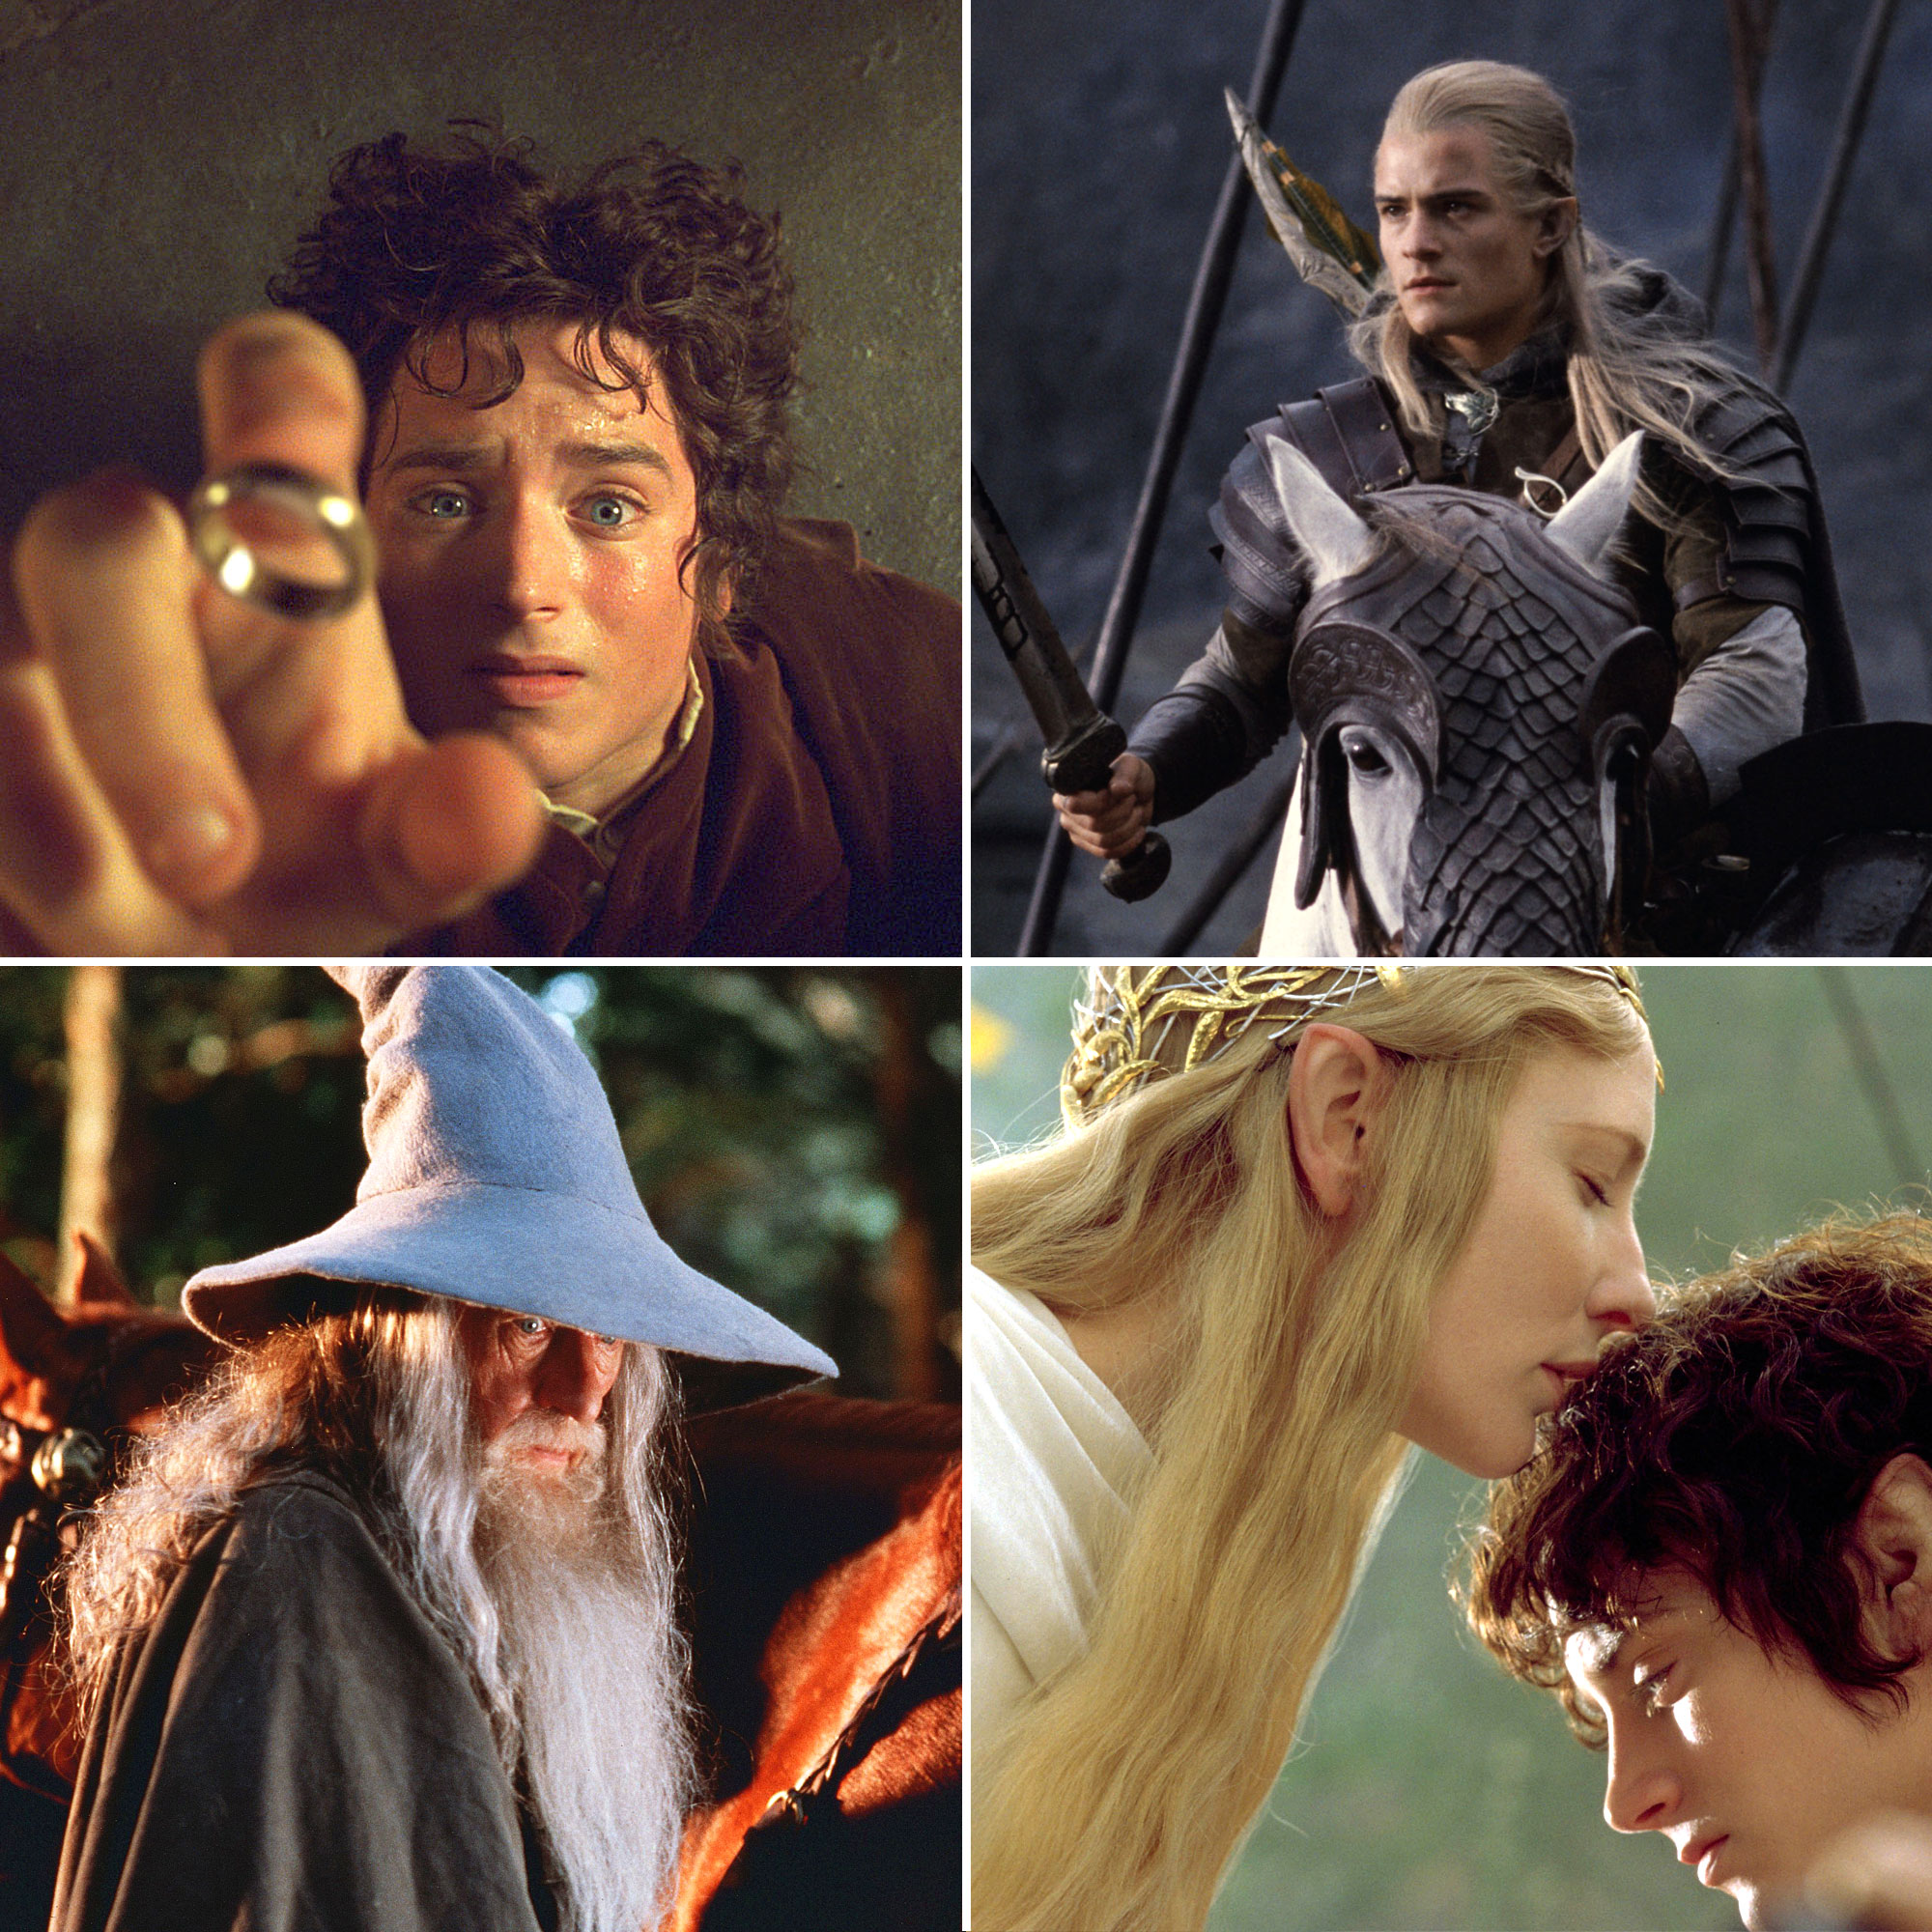 Lord of the Rings/The Hobbit Preferences